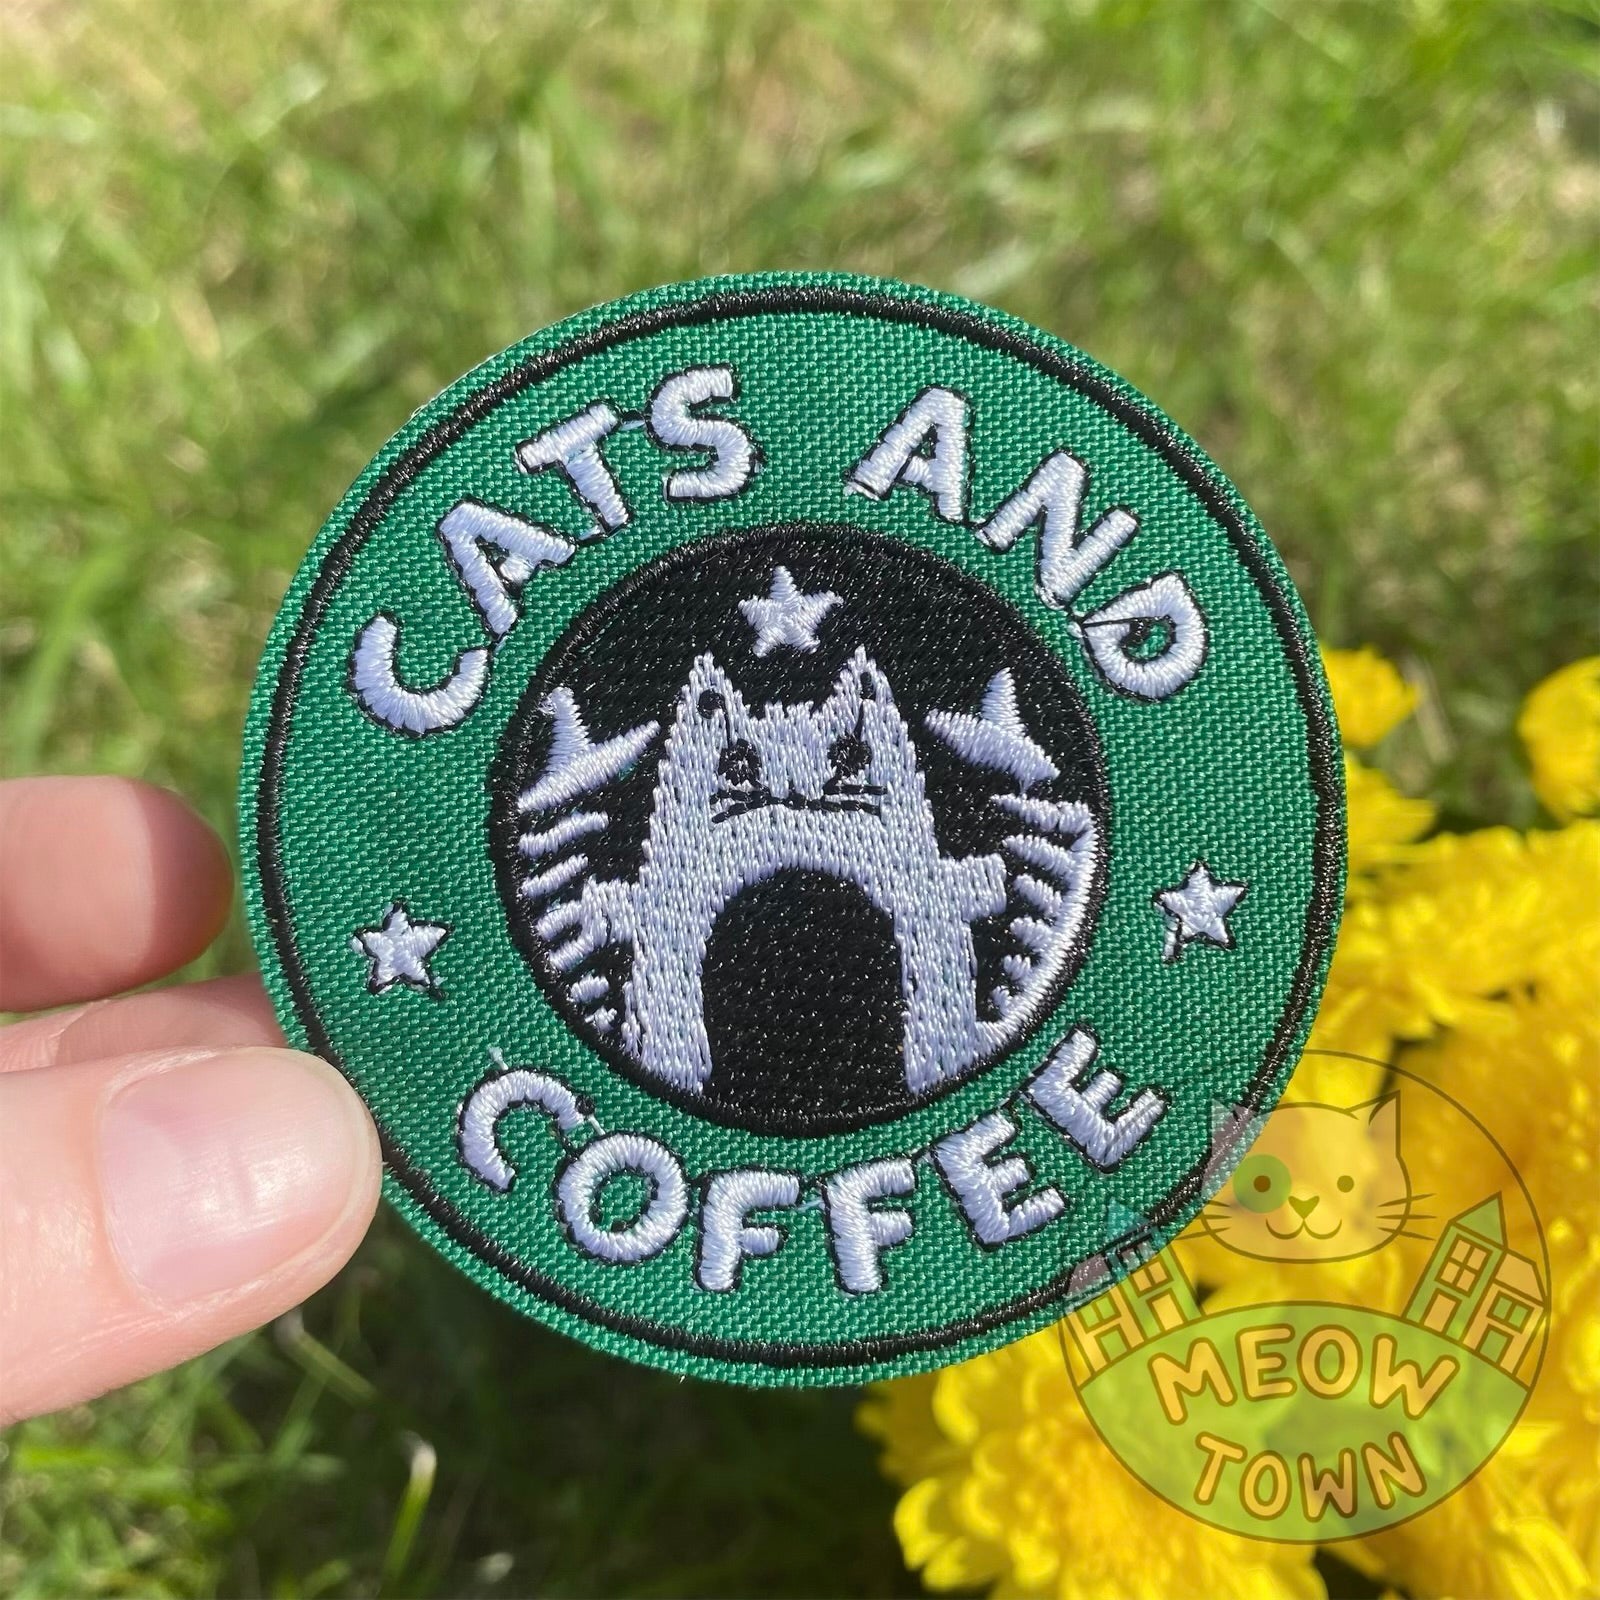 Adorable embroidered iron-on cat patch with ‘Cats and coffee’ slogan. A perfect way to bring new life to your old garments or to cover small holes or marks with this cute patch!